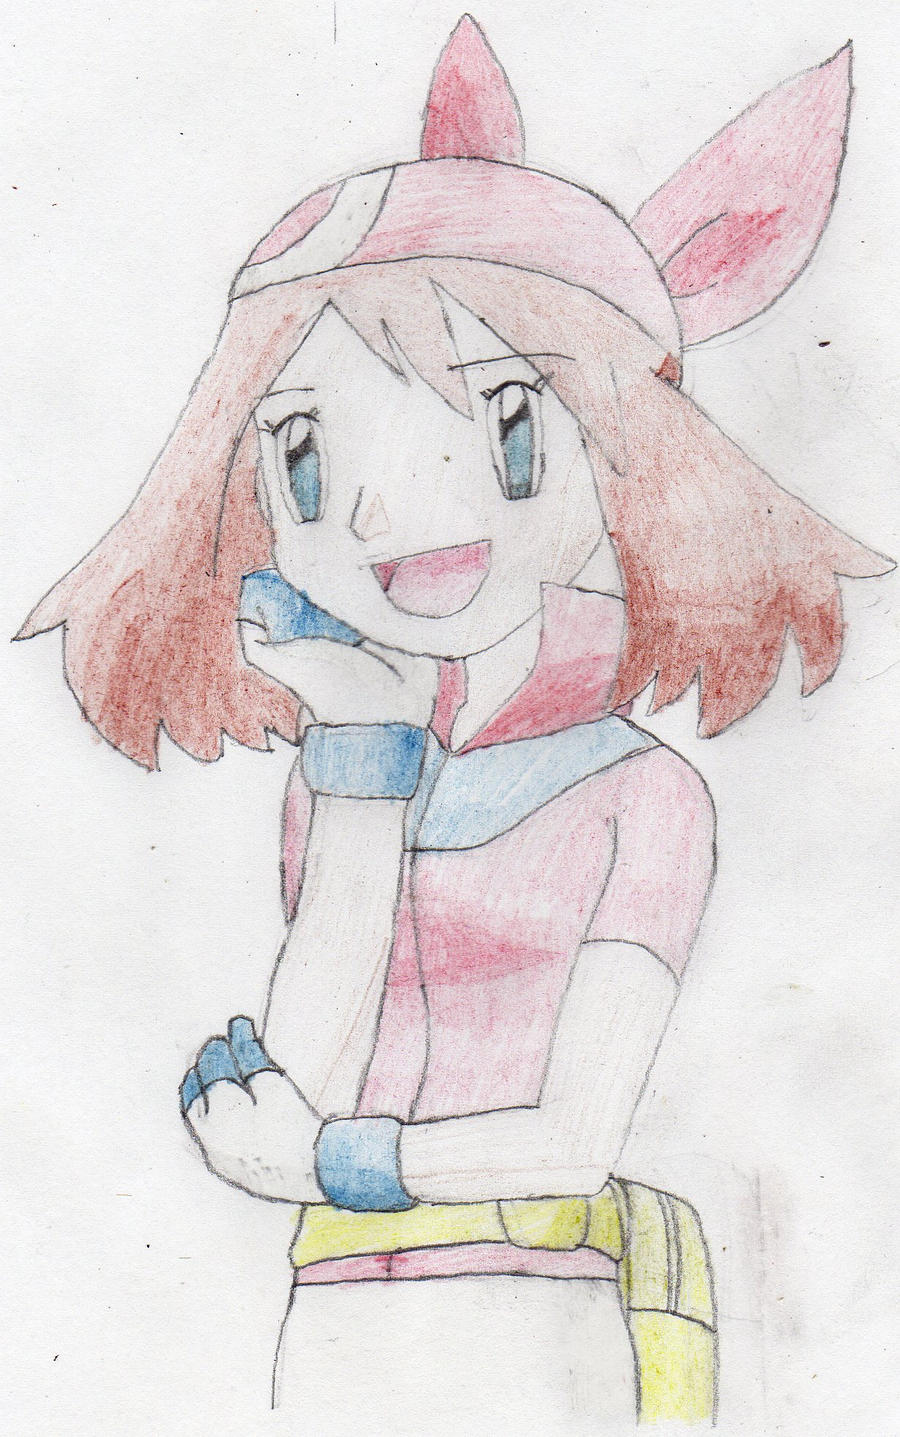 may_thinks_ash_is_amazing_by_sunshinemew_d2ucldo-fullview.jpg